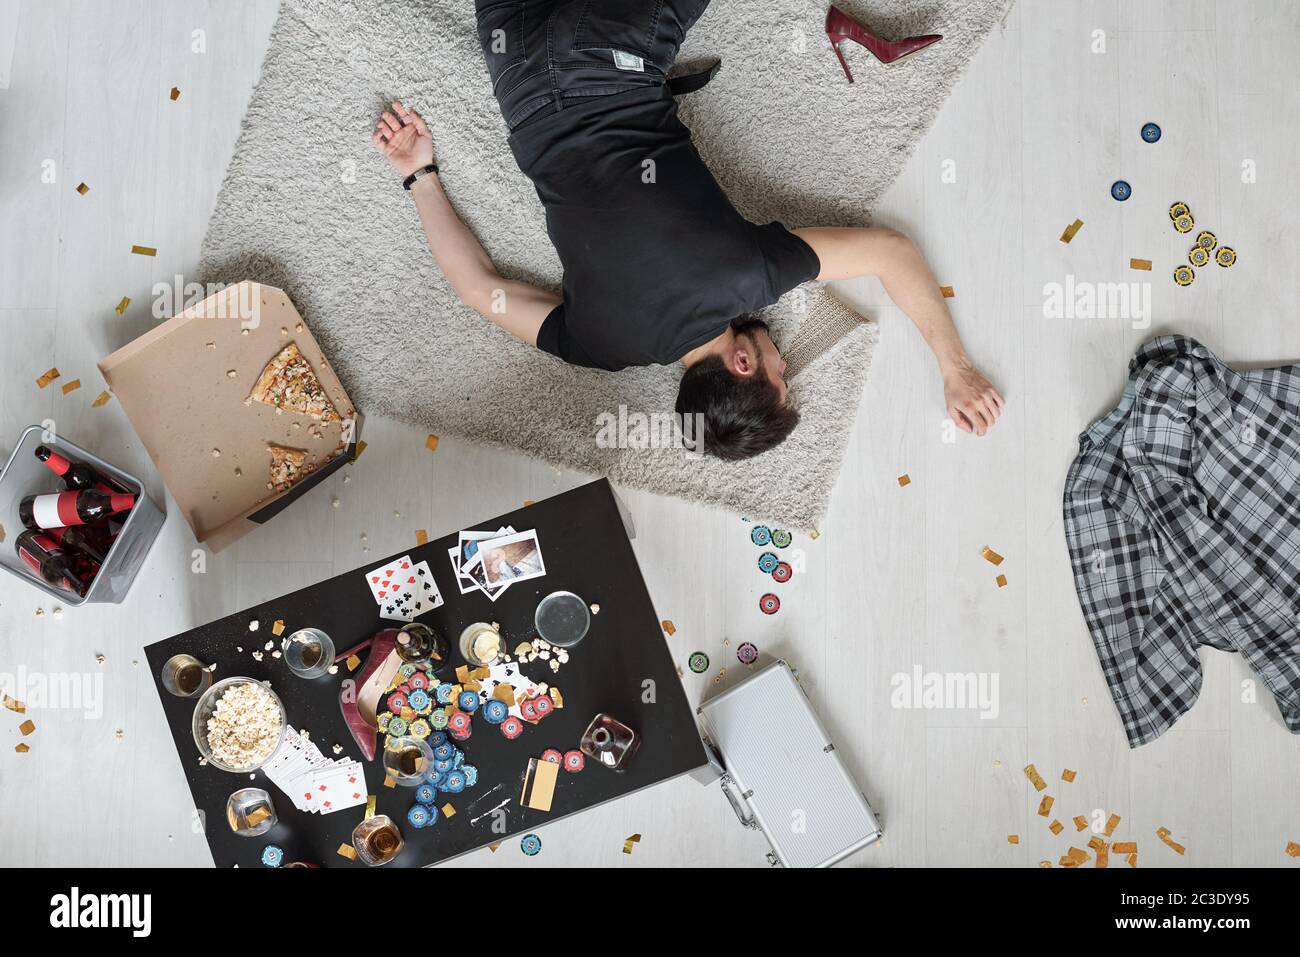 Above view of man sleeping on floor among messy poker chips and snacks after home party Stock Photo